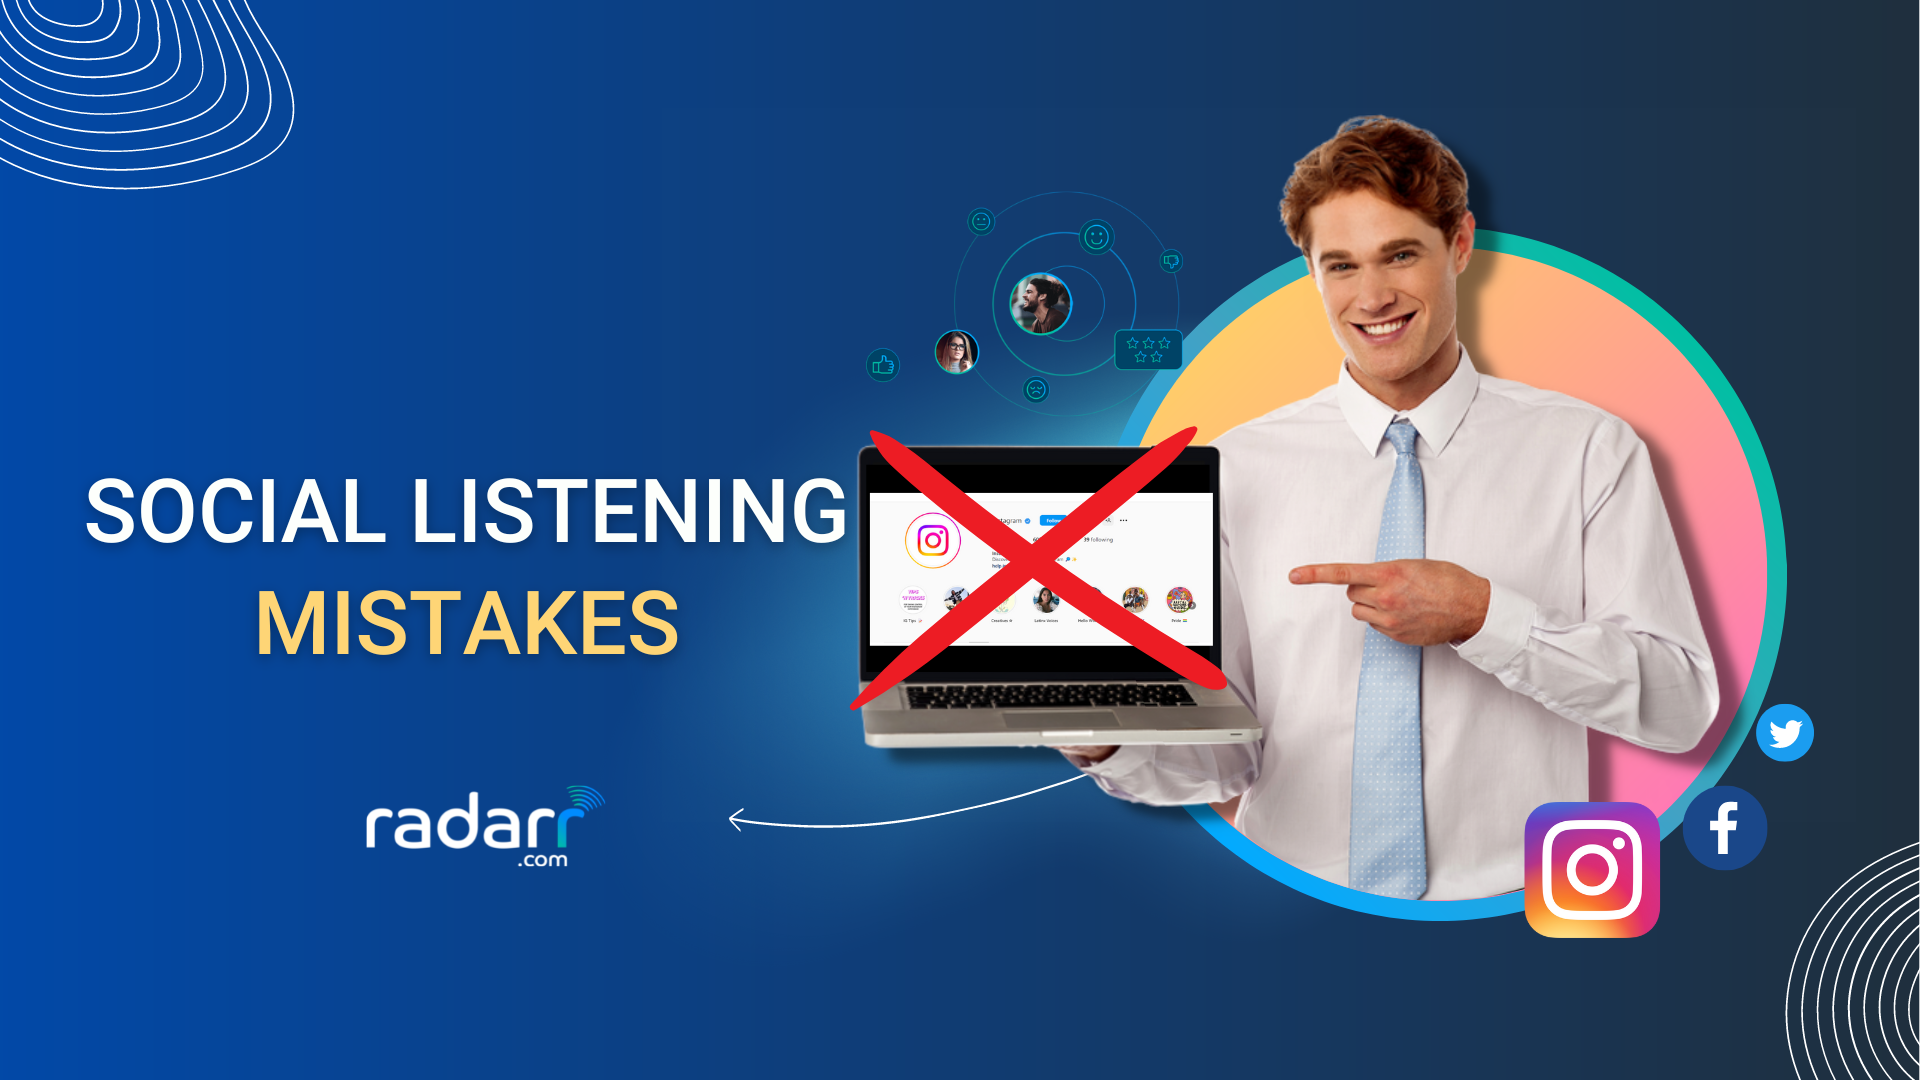 social listening mistakes your brand needs to avoid